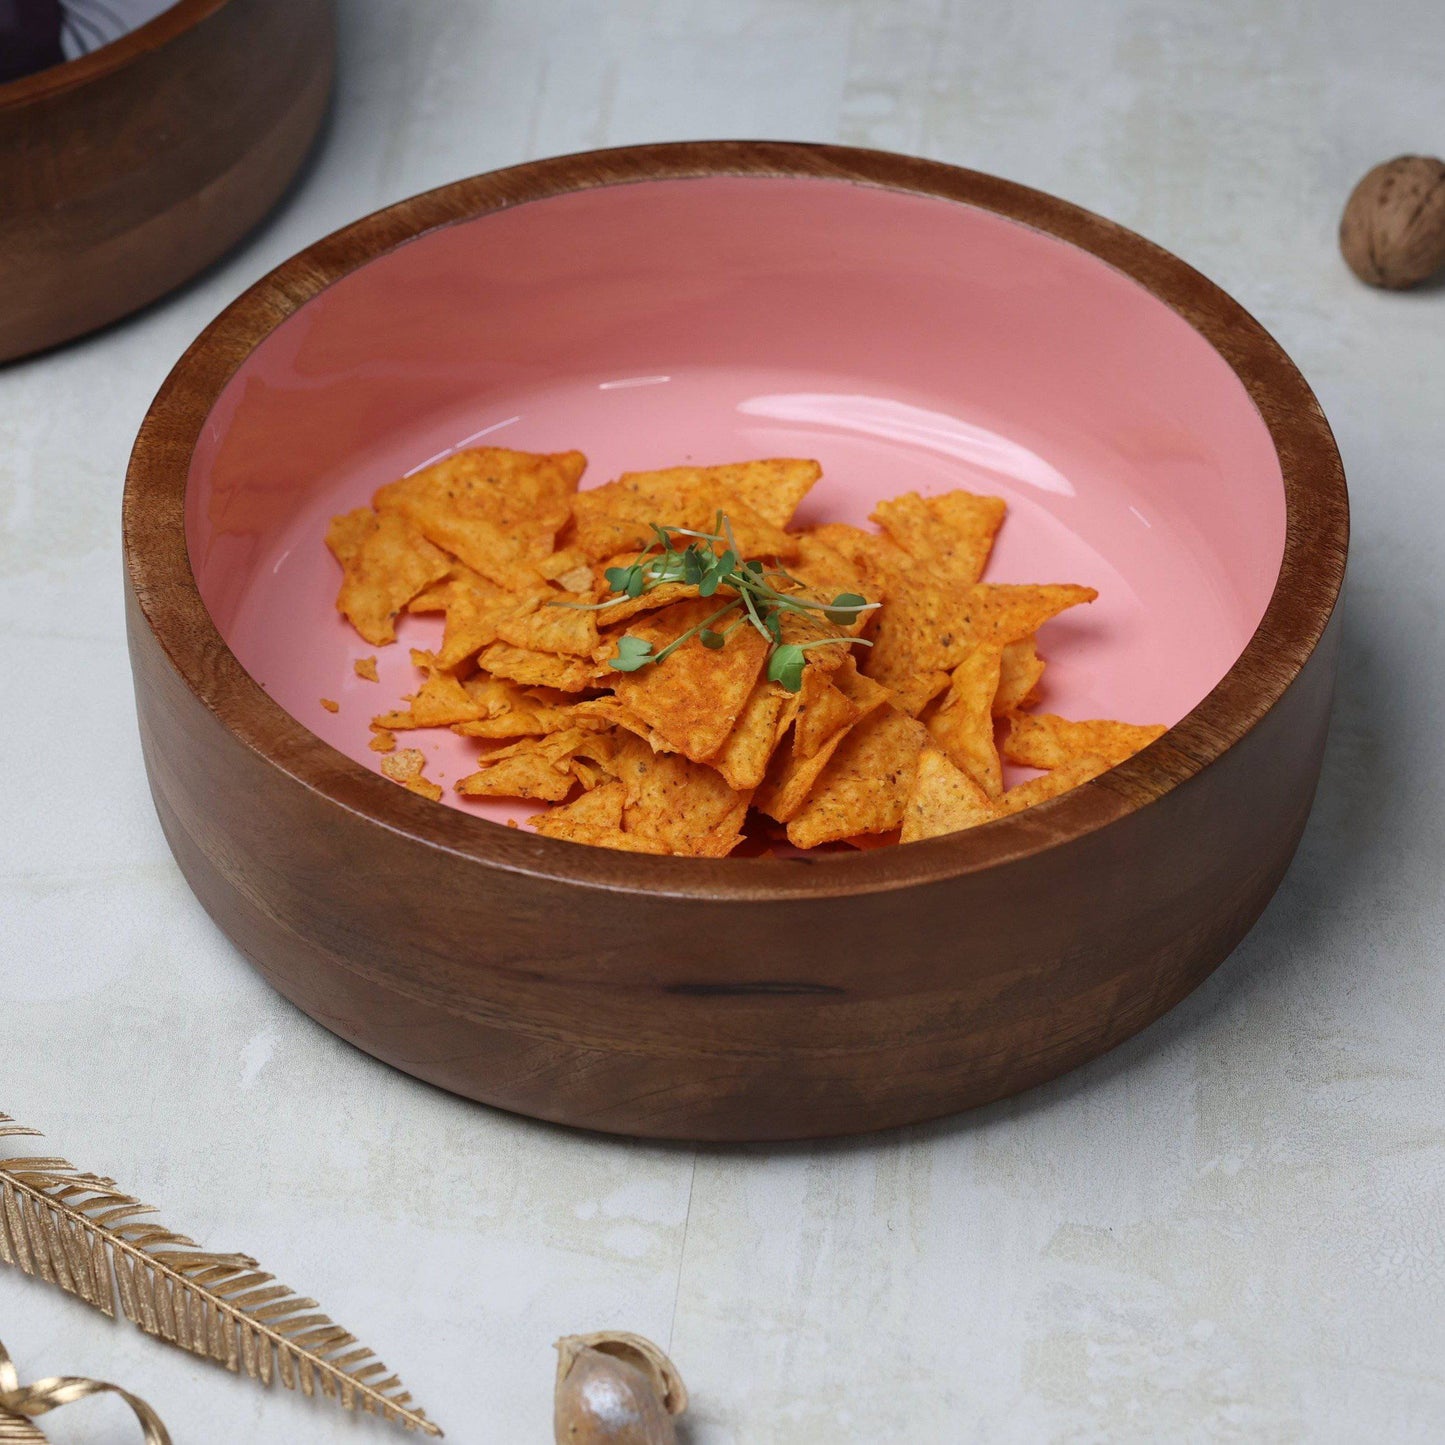 Pink Multipurpose Large Snack Wooden Bowl - The Decor Circle